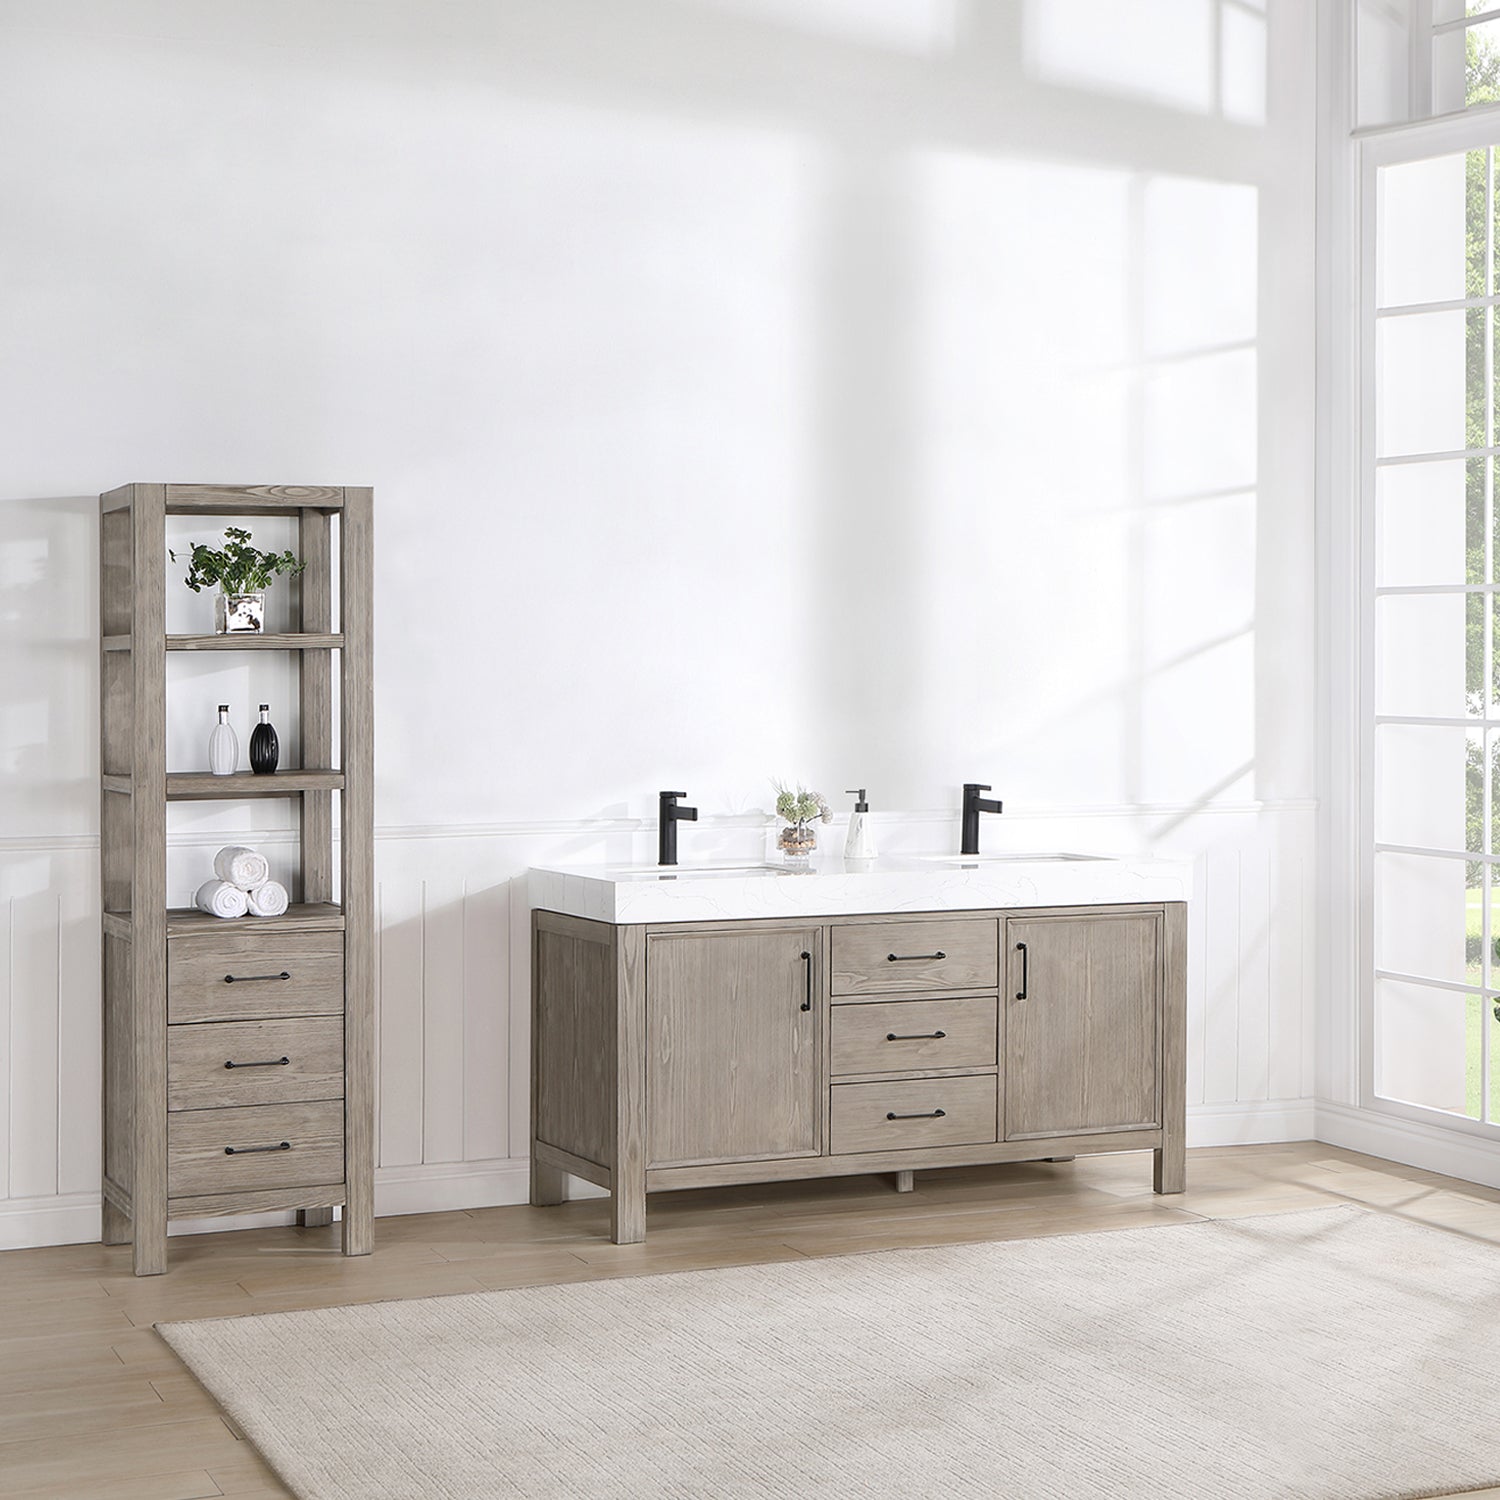 Vinnova Design León 60in. Free standing Double Bathroom Vanity in Fir Wood Grey with Composite top in Lightning White - New Star Living